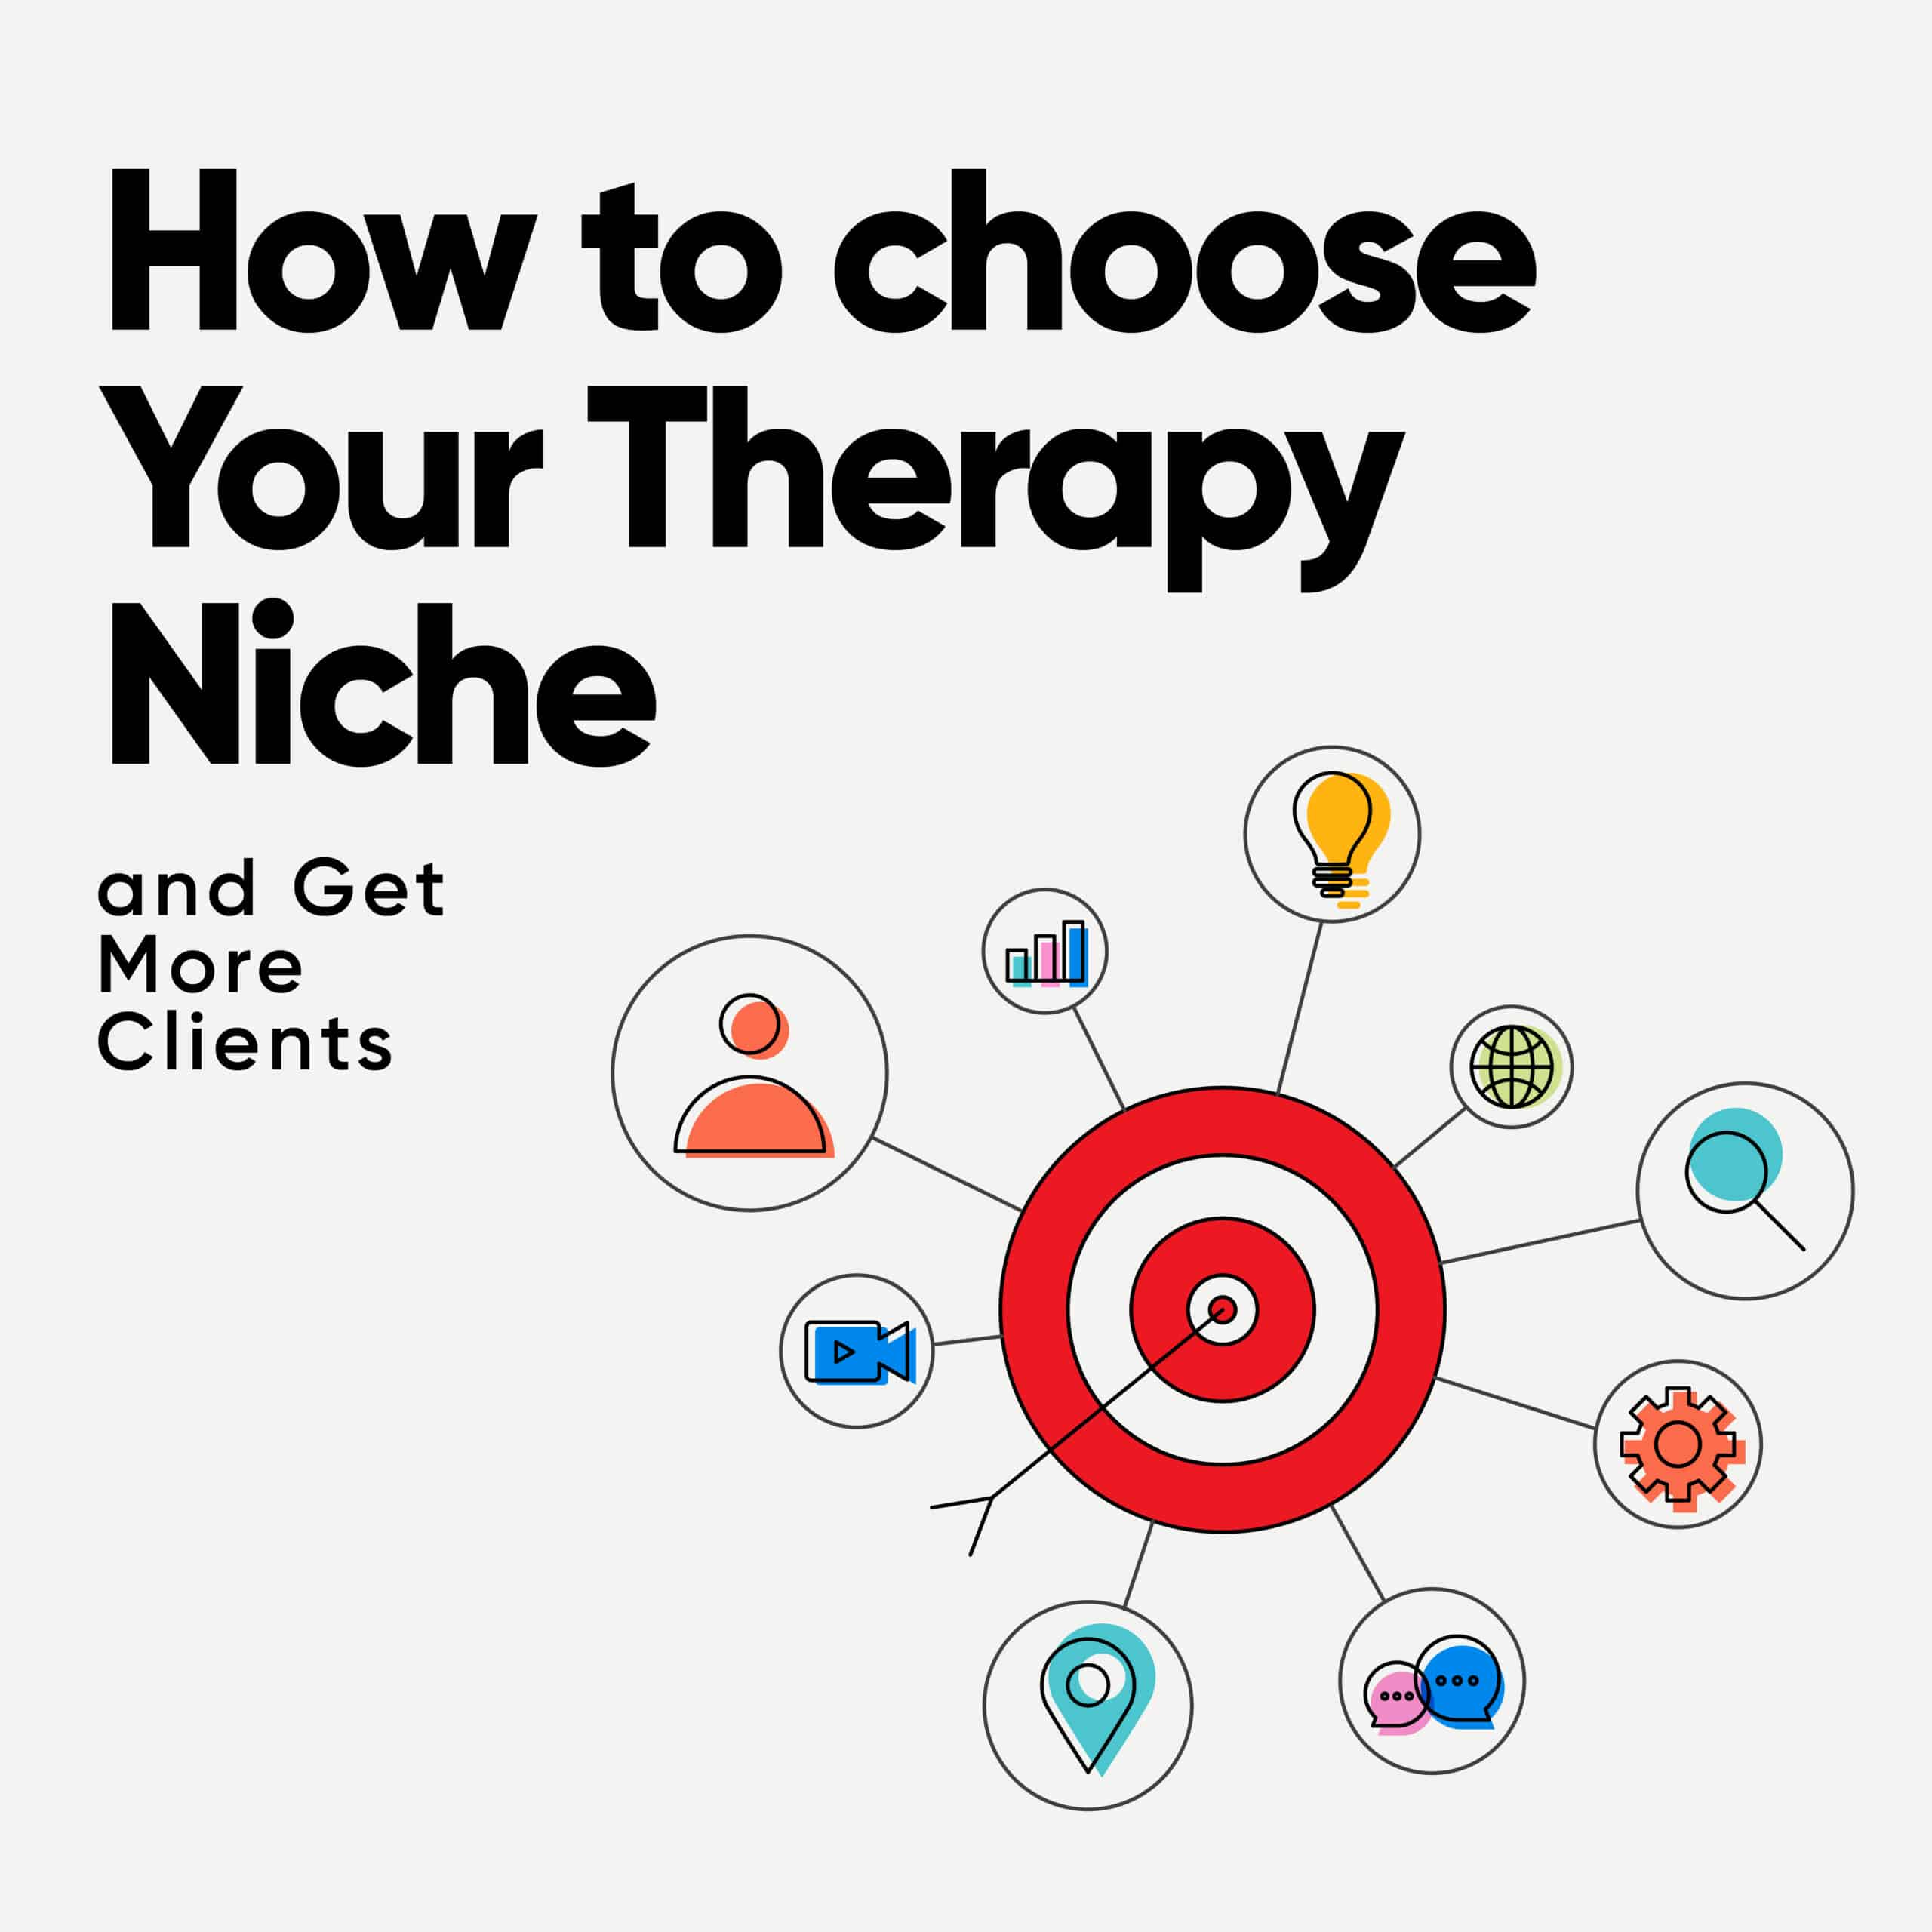 How to Choose Your Therapy Niche and Get More Clients